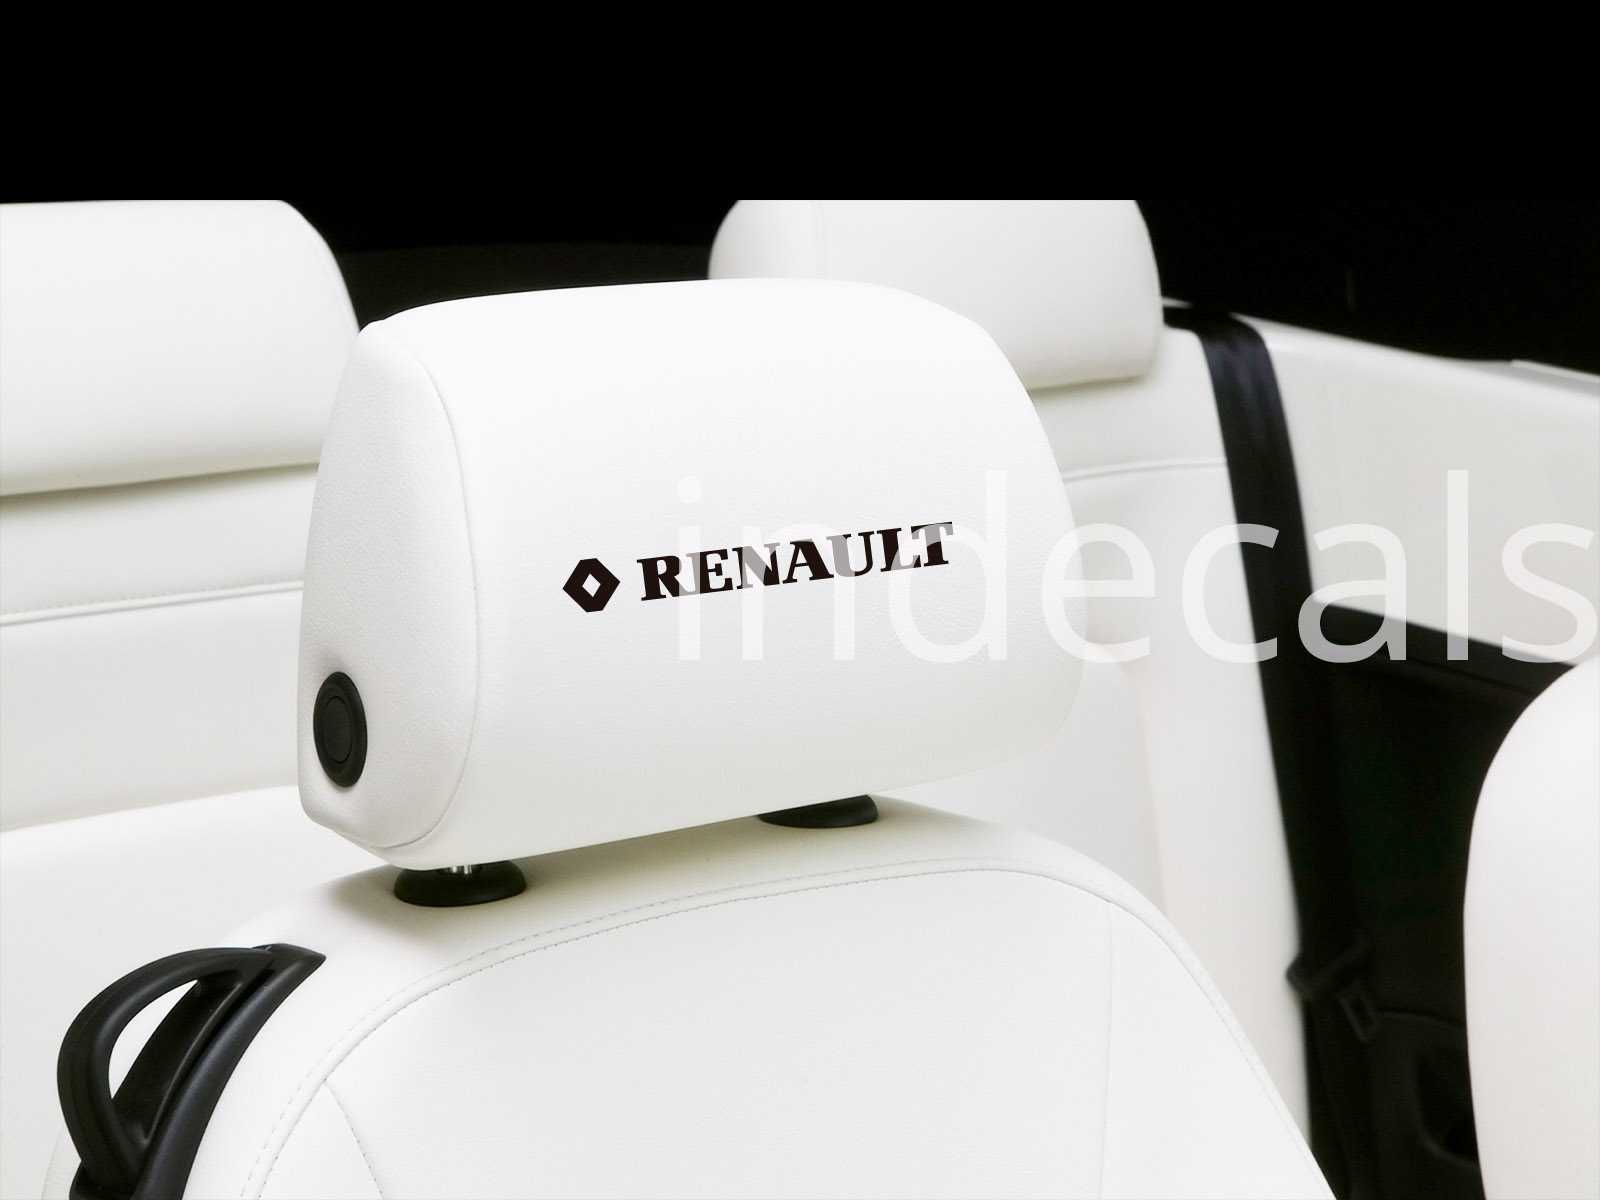 6 x Renault Stickers for Headrests - Black